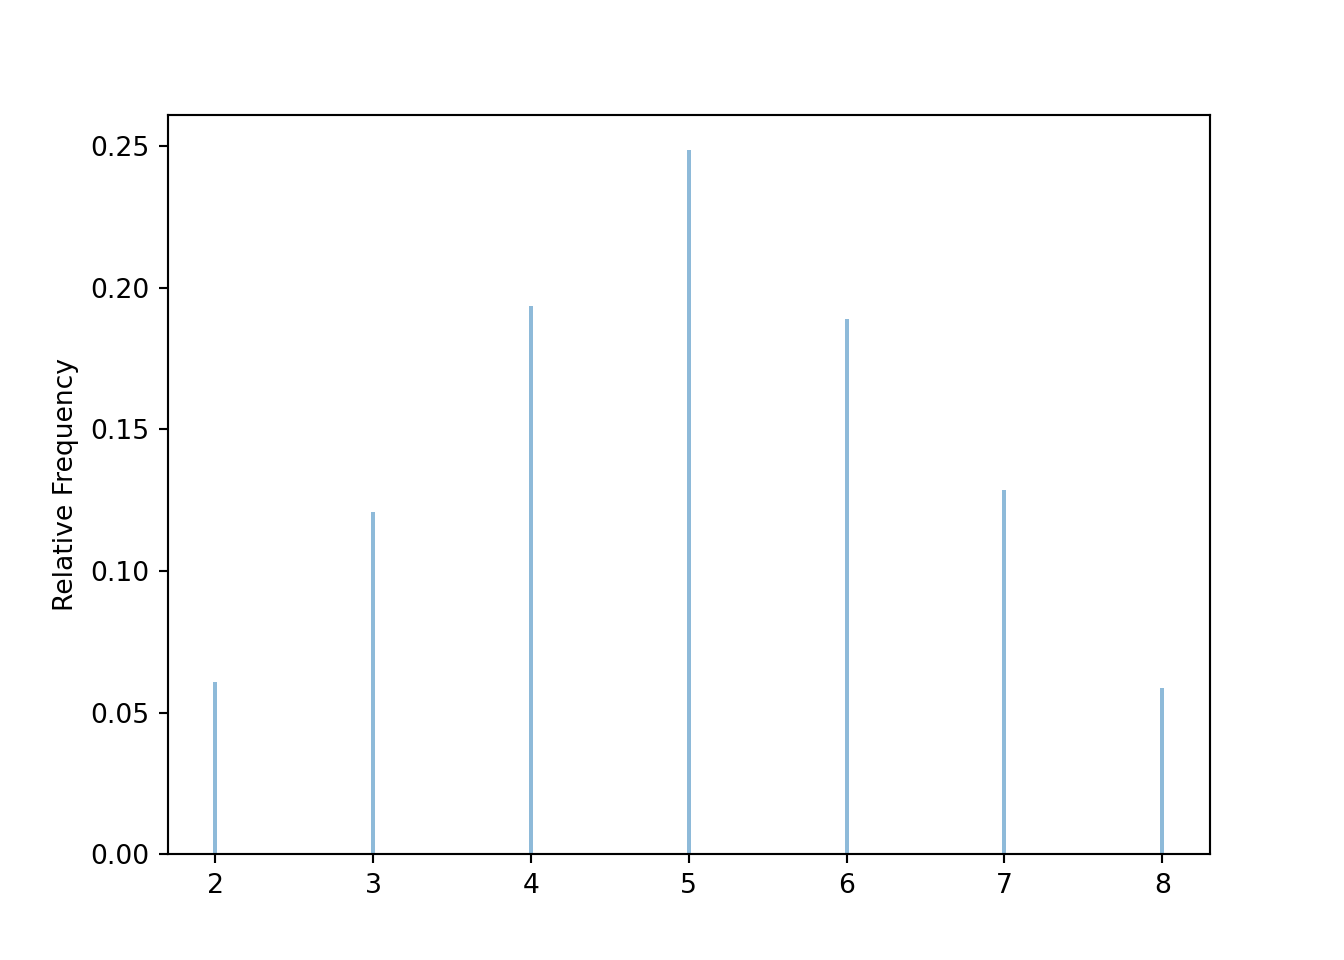 Simulation-based approximate distribution of \(X\), the sum of two rolls of a fair four-sided die.